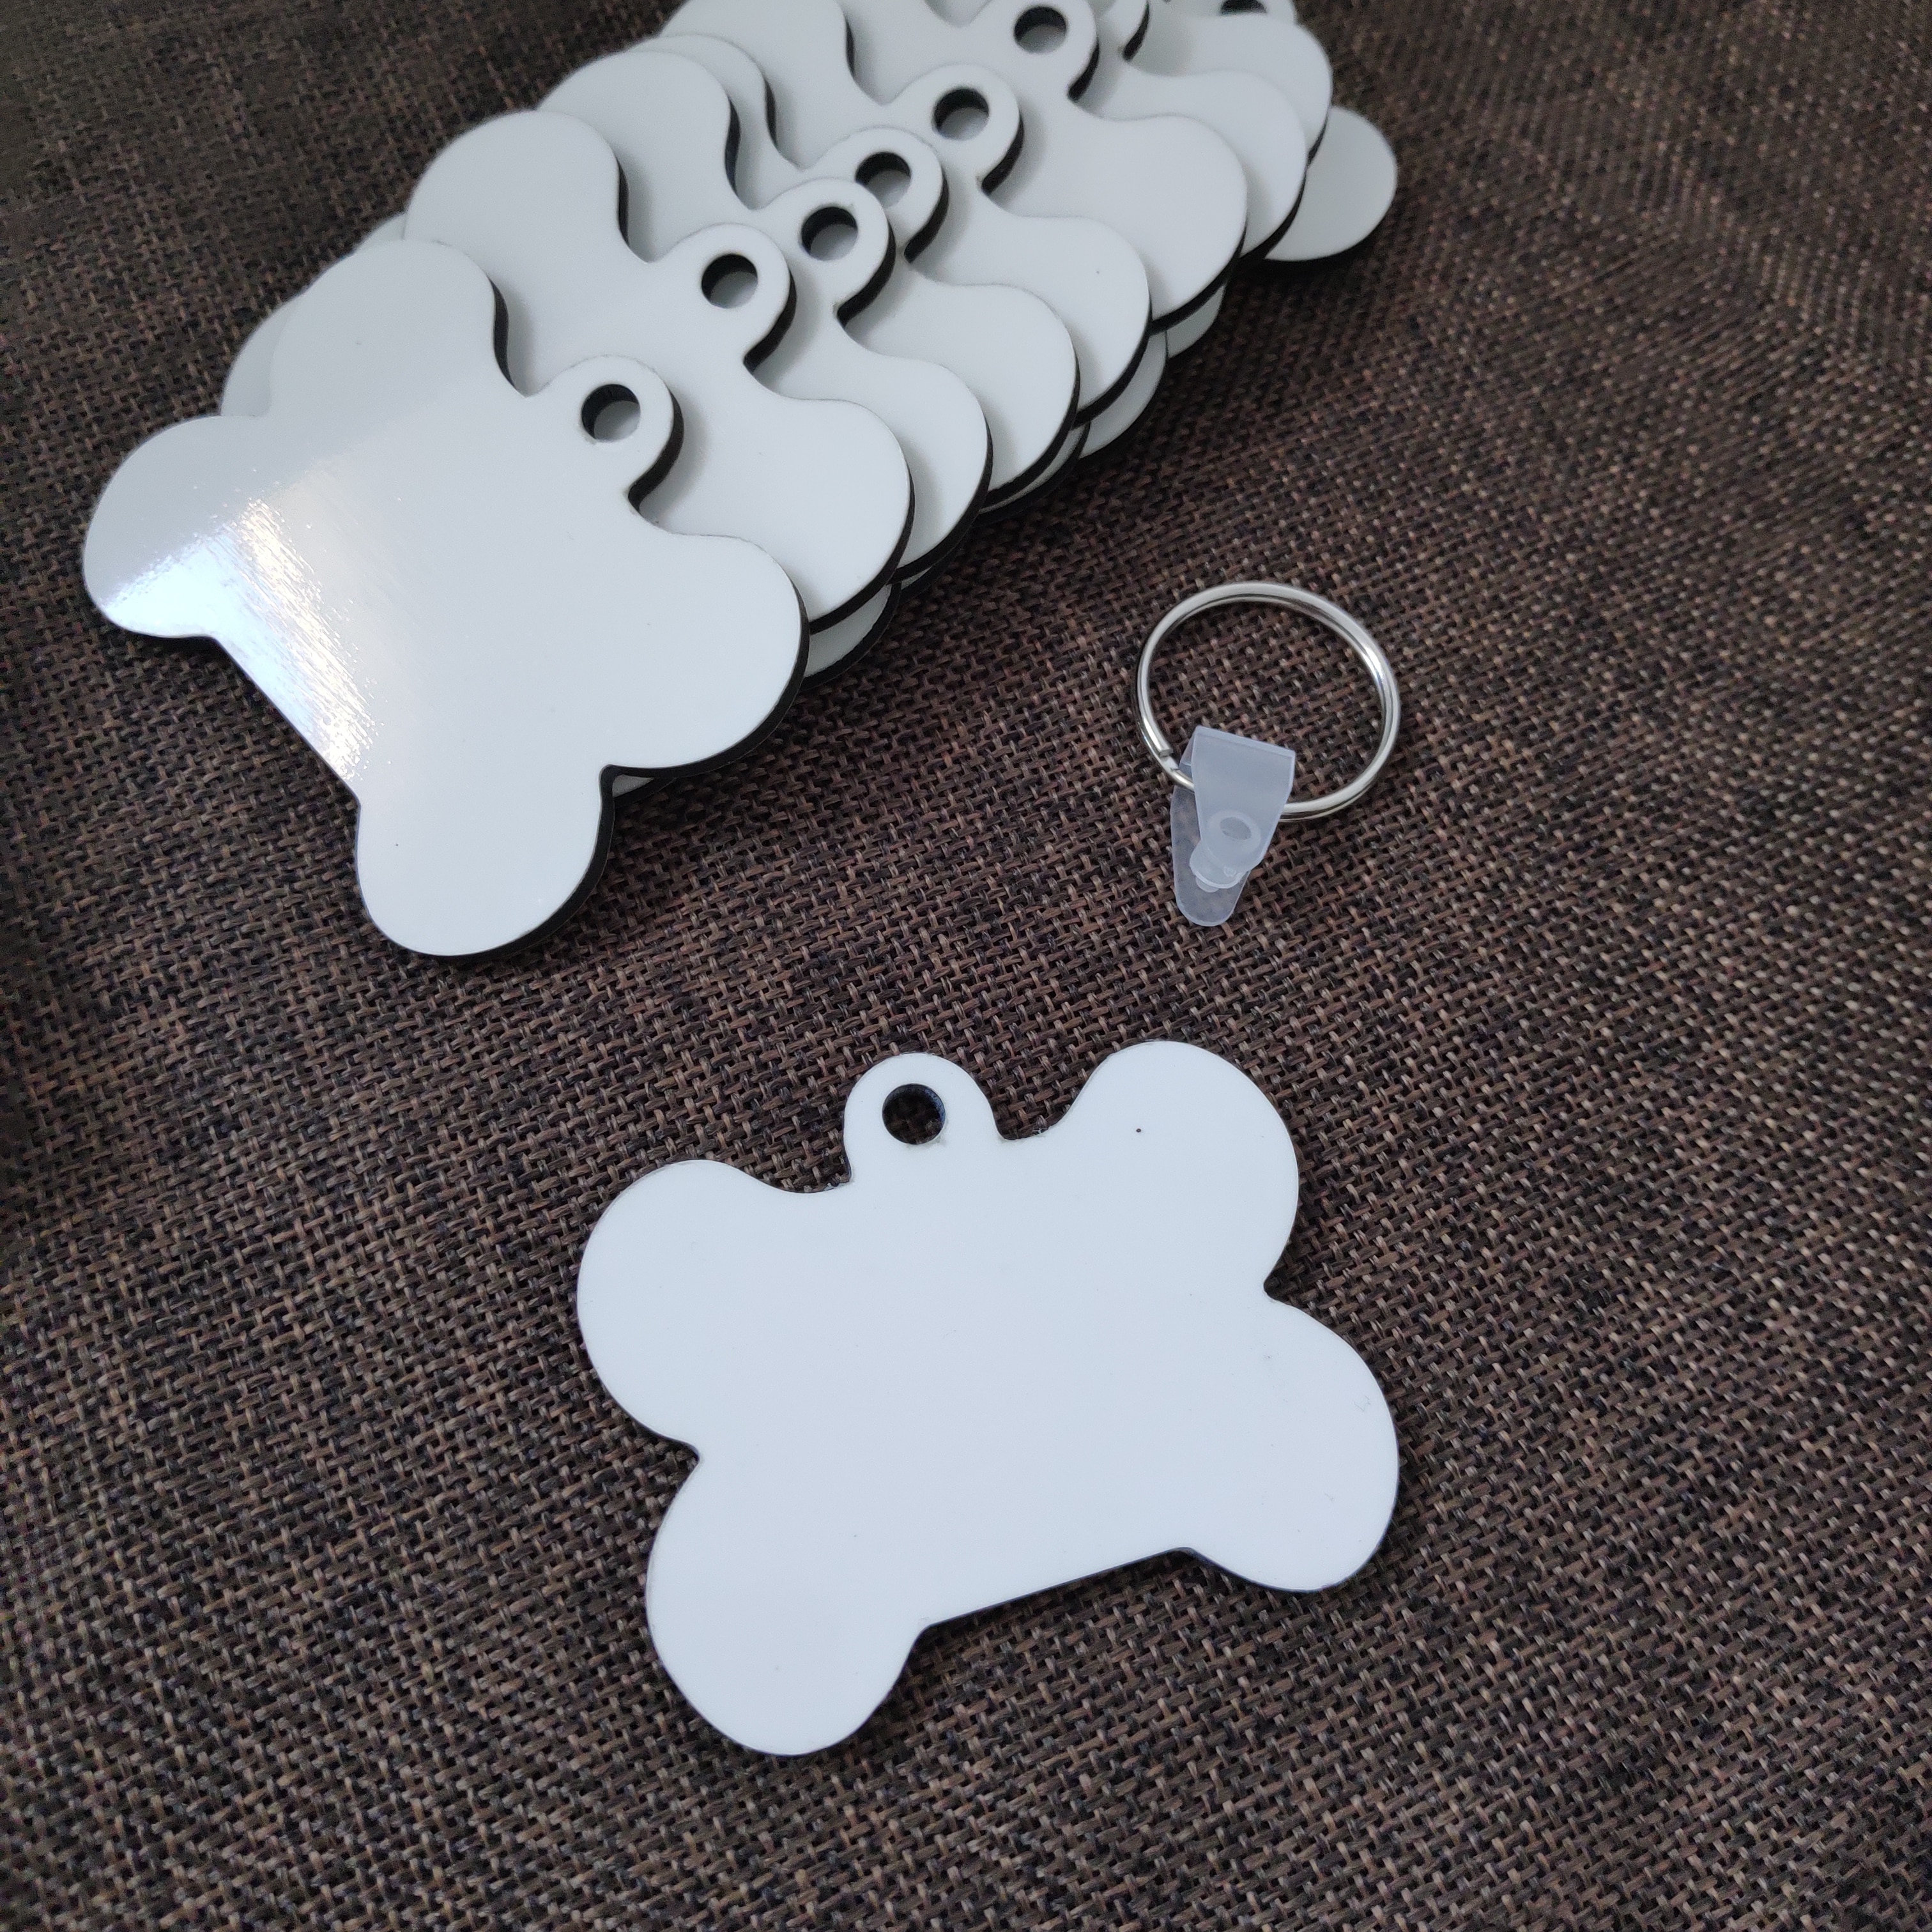 10pcs/lots Blank Sublimation MDF Key Rings Keychain Lovely Bone Shape DIY Printing Sublimation Ink Two Sides can Print